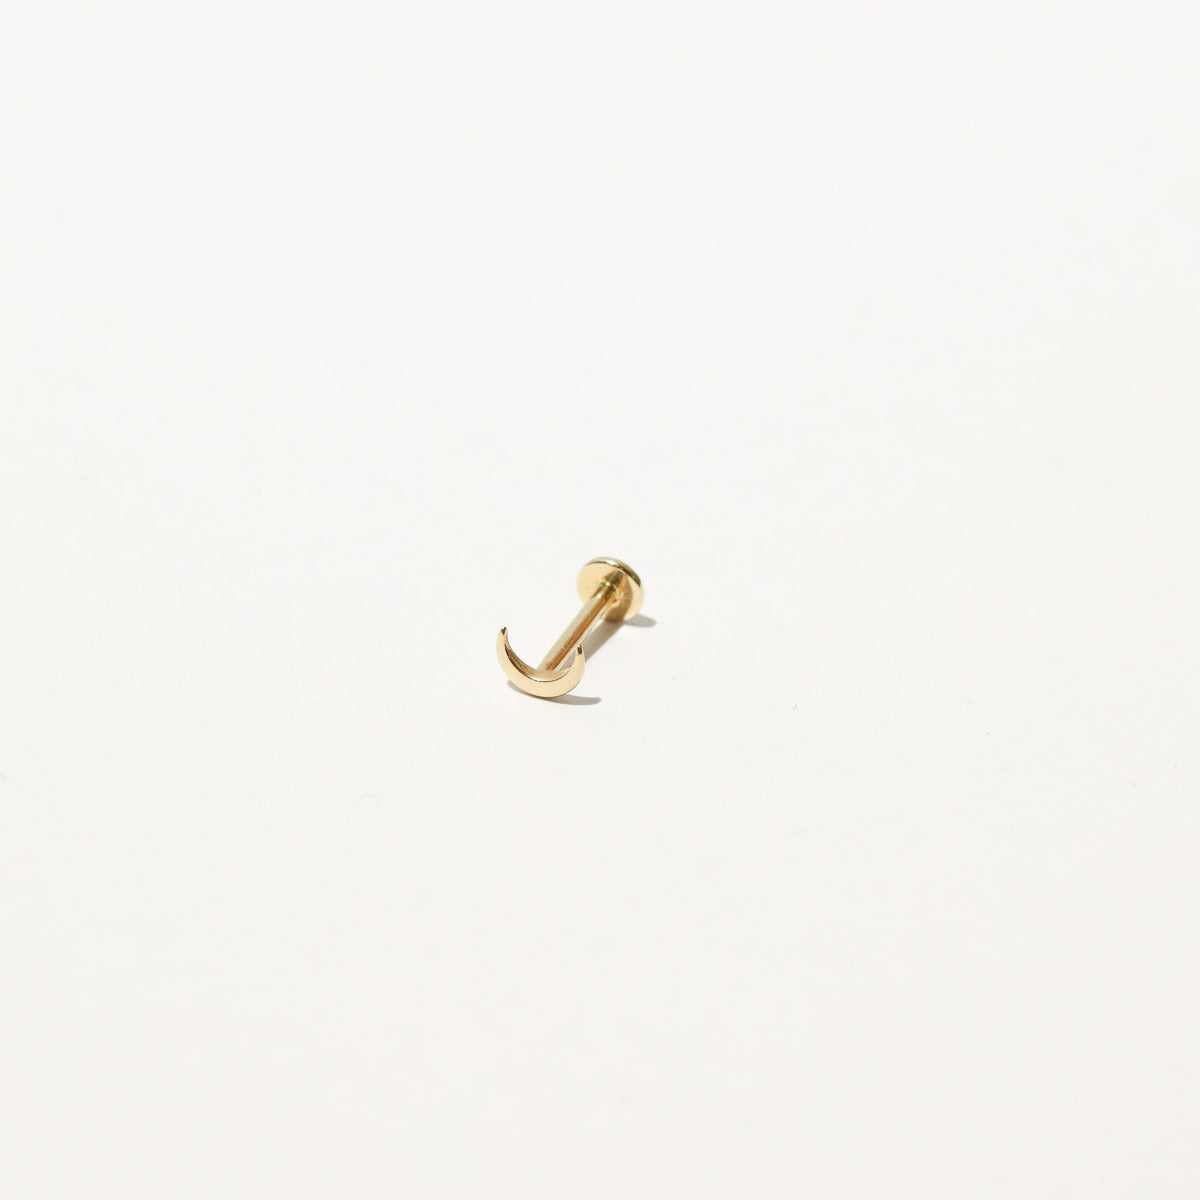 Moon Piercing Stud in Solid Gold flat lay